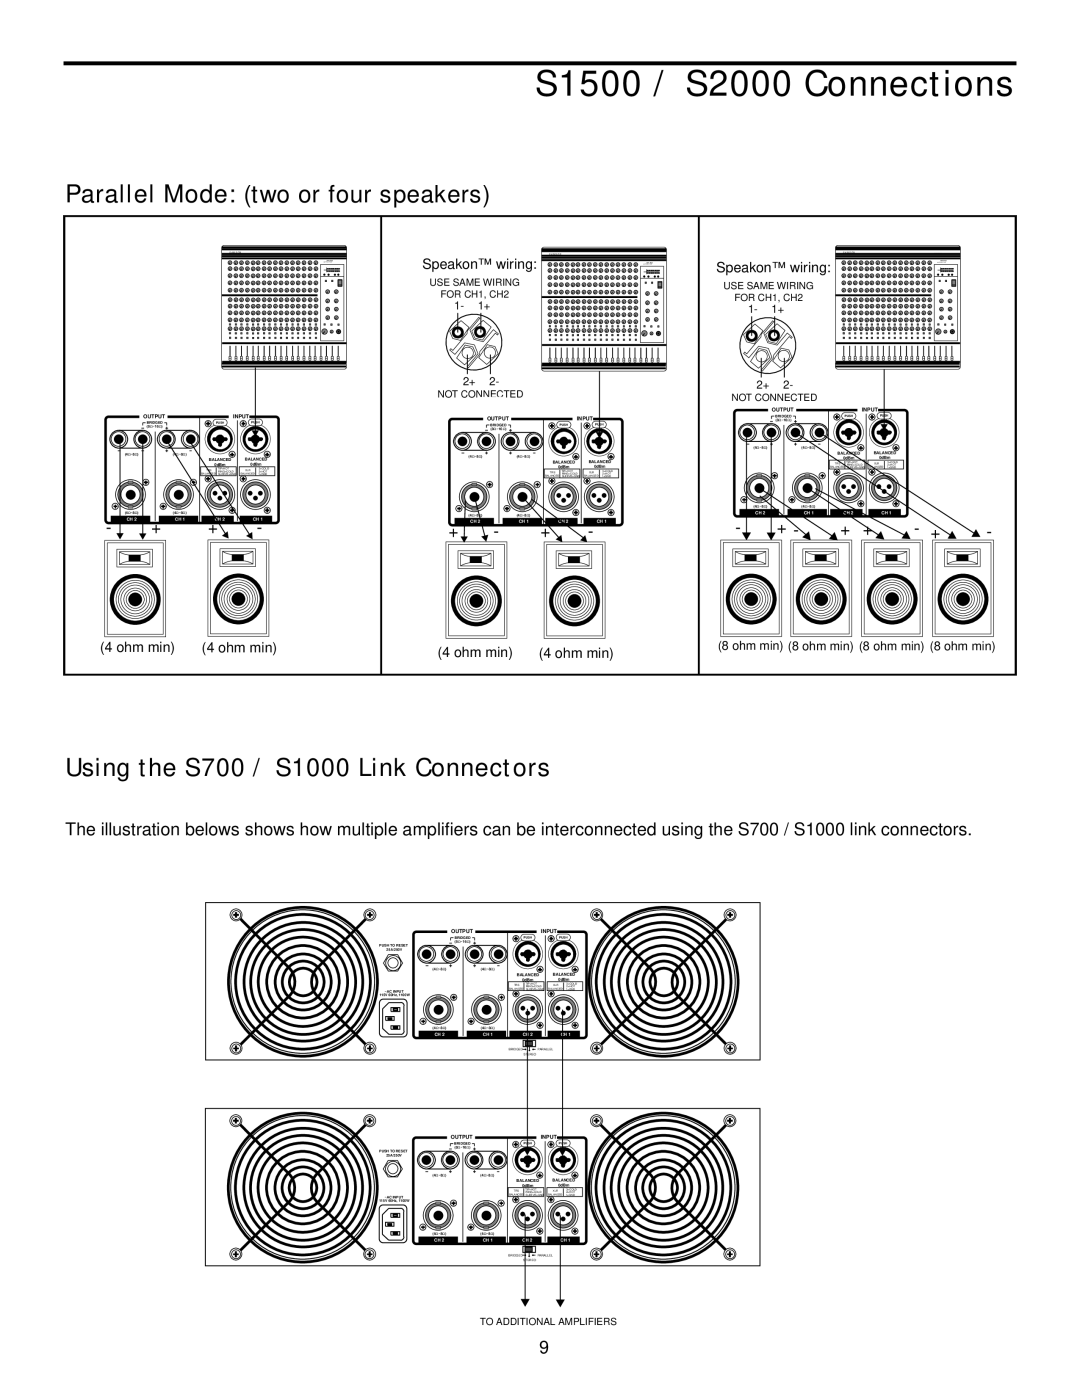 Samson Parallel Mode two or four speakers, S1500 / S2000 Connections, Using the S700 / S1000 Link Connectors, 1- 1+ 